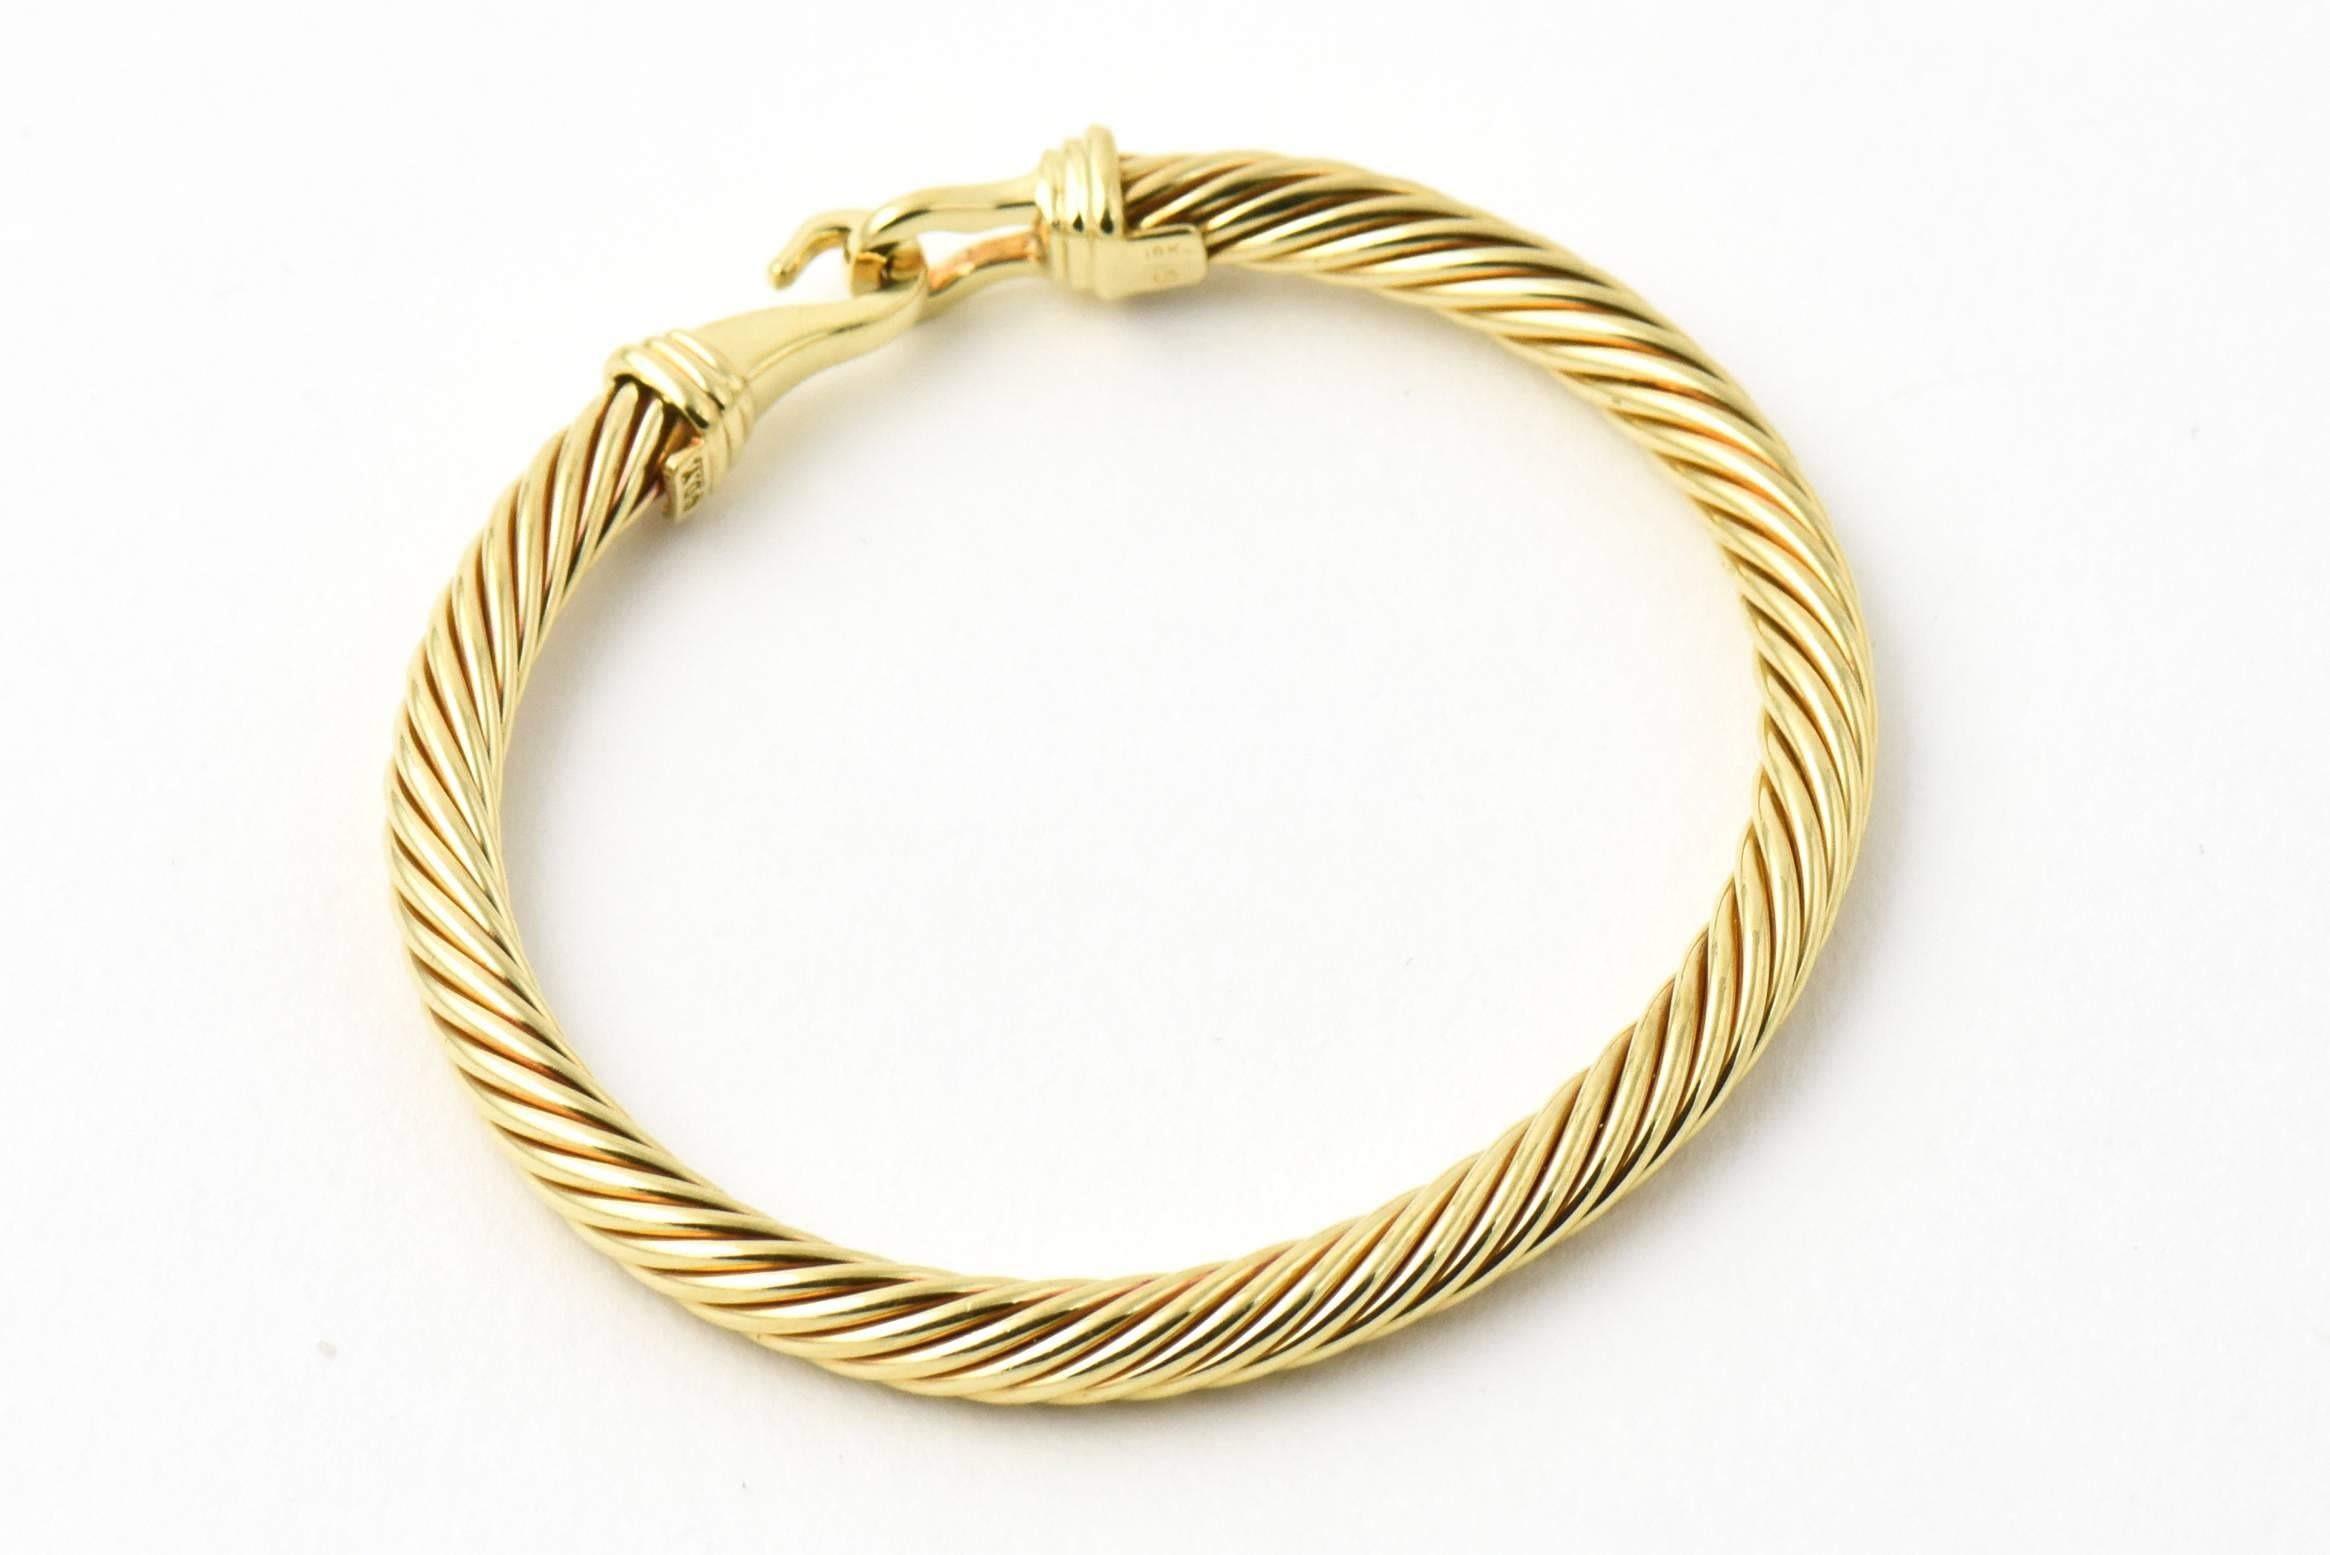 5mm Size David Yurman Cable Hook & Buckle 18k Bangle Bracelet
6.18 interior circumference 
Marked DY 18k

This model is currently on Yurman's site - the information is below:
Cable Classic Buckle Bracelet in 18K Gold, 5mm
$3,300
18-karat